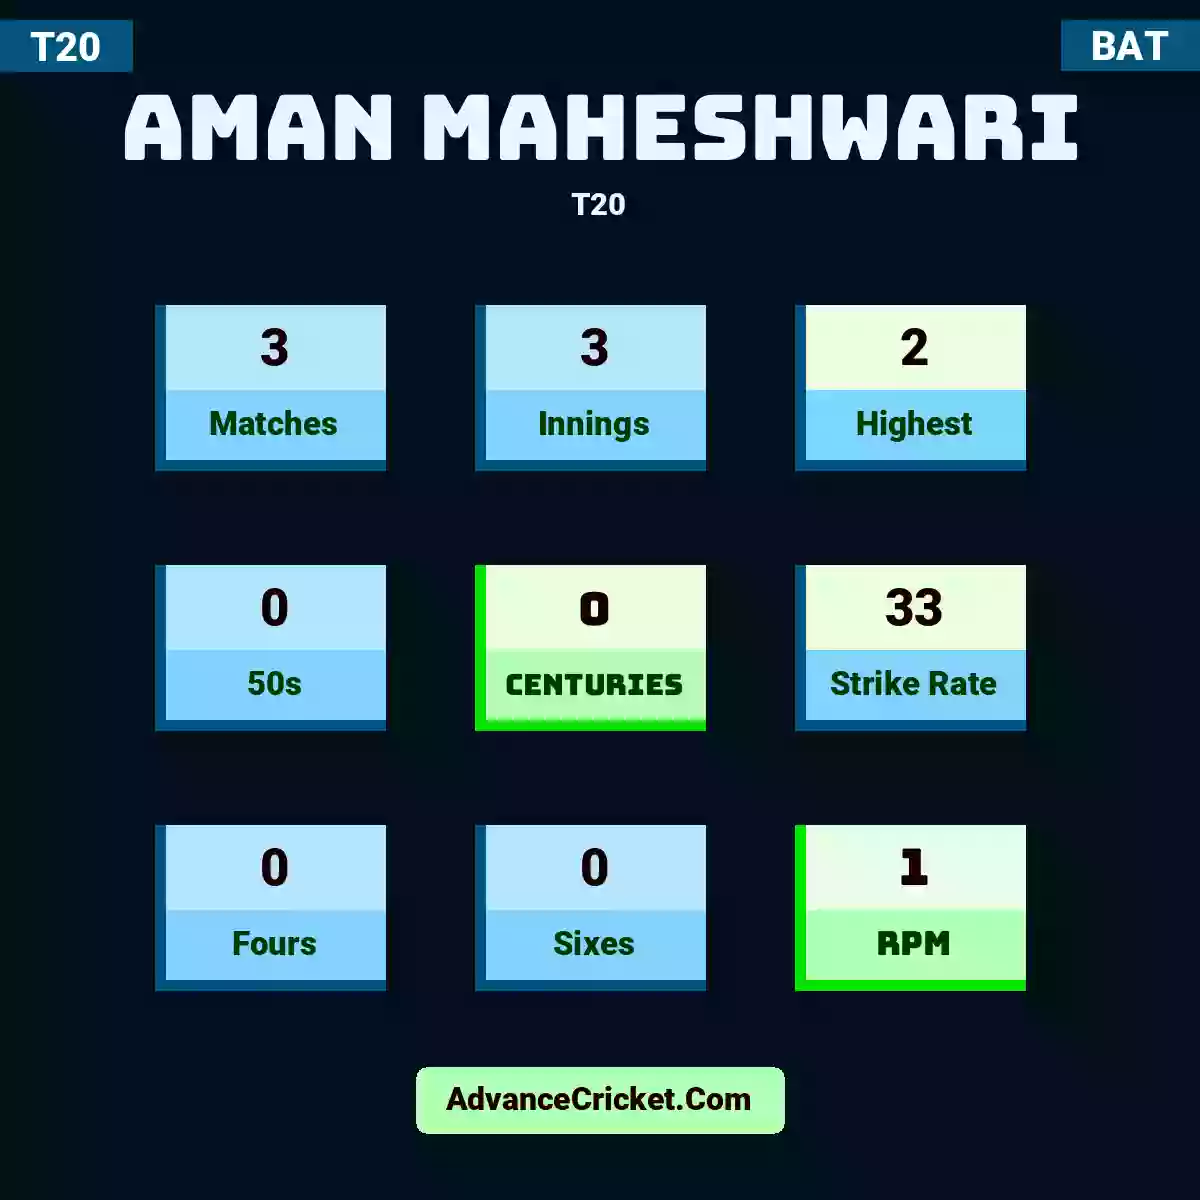 Aman Maheshwari T20 , Aman Maheshwari played 3 matches, scored 2 runs as highest, 0 half-centuries, and 0 centuries, with a strike rate of 33. A.Maheshwari hit 0 fours and 0 sixes, with an RPM of 1.